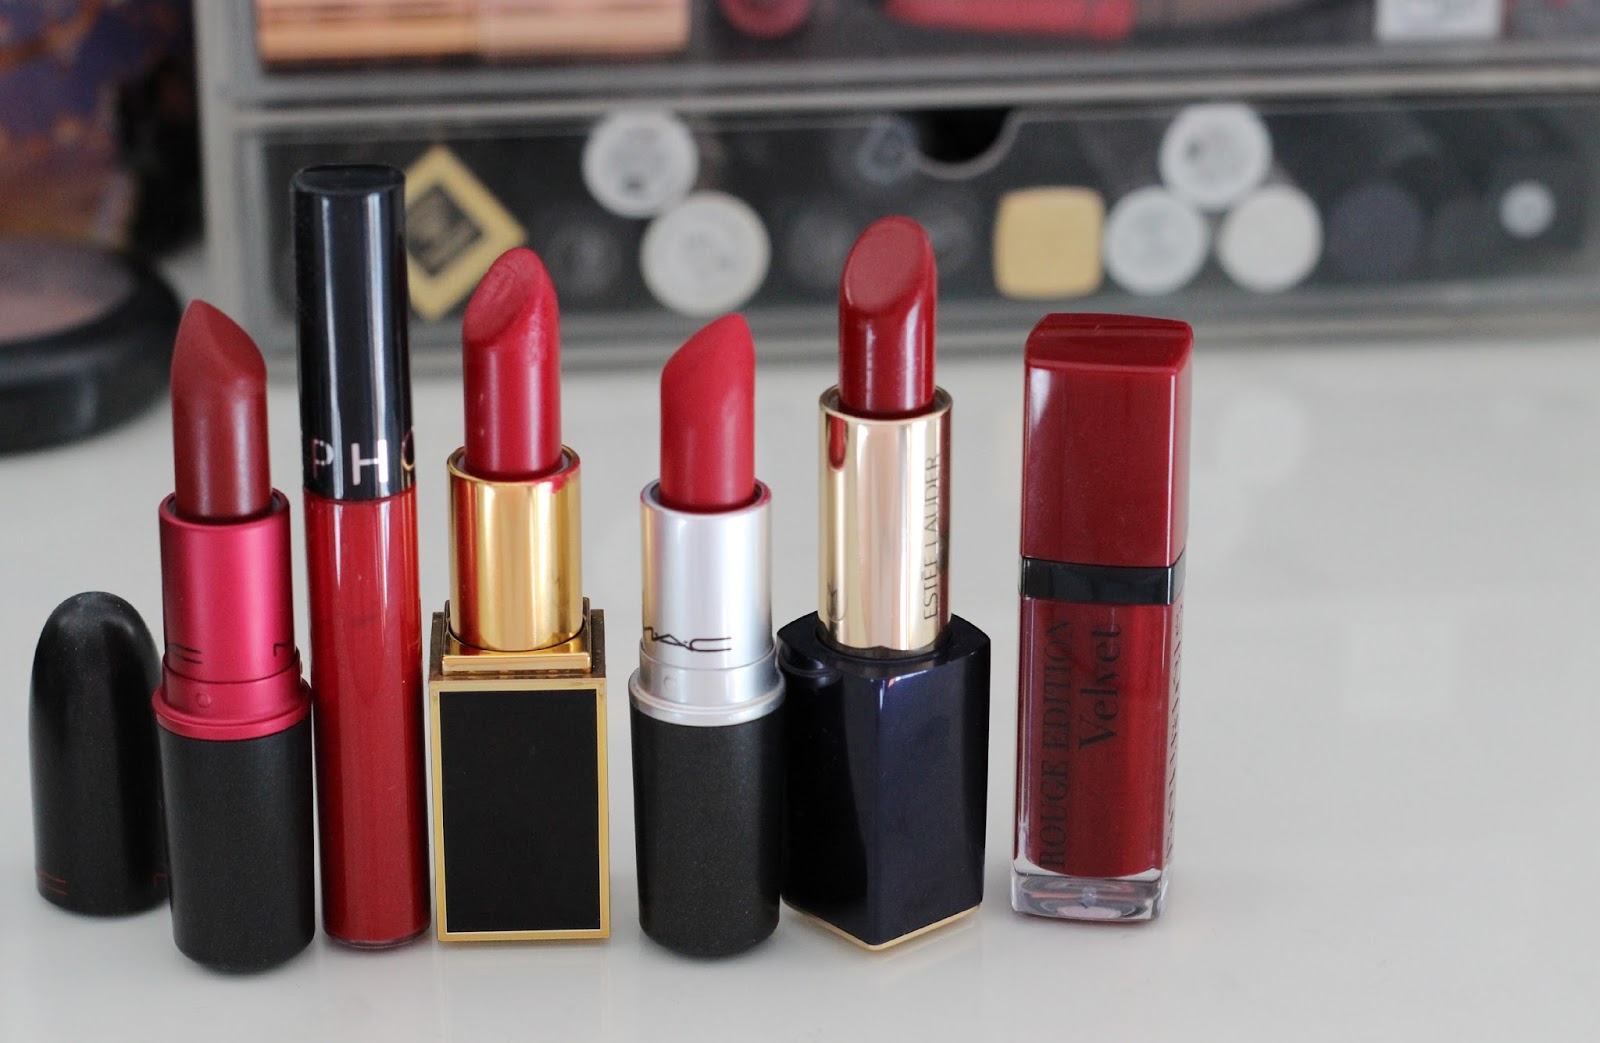 Guest Post | 6 Red Lipsticks That Make You Feel Movie Star Glamorous